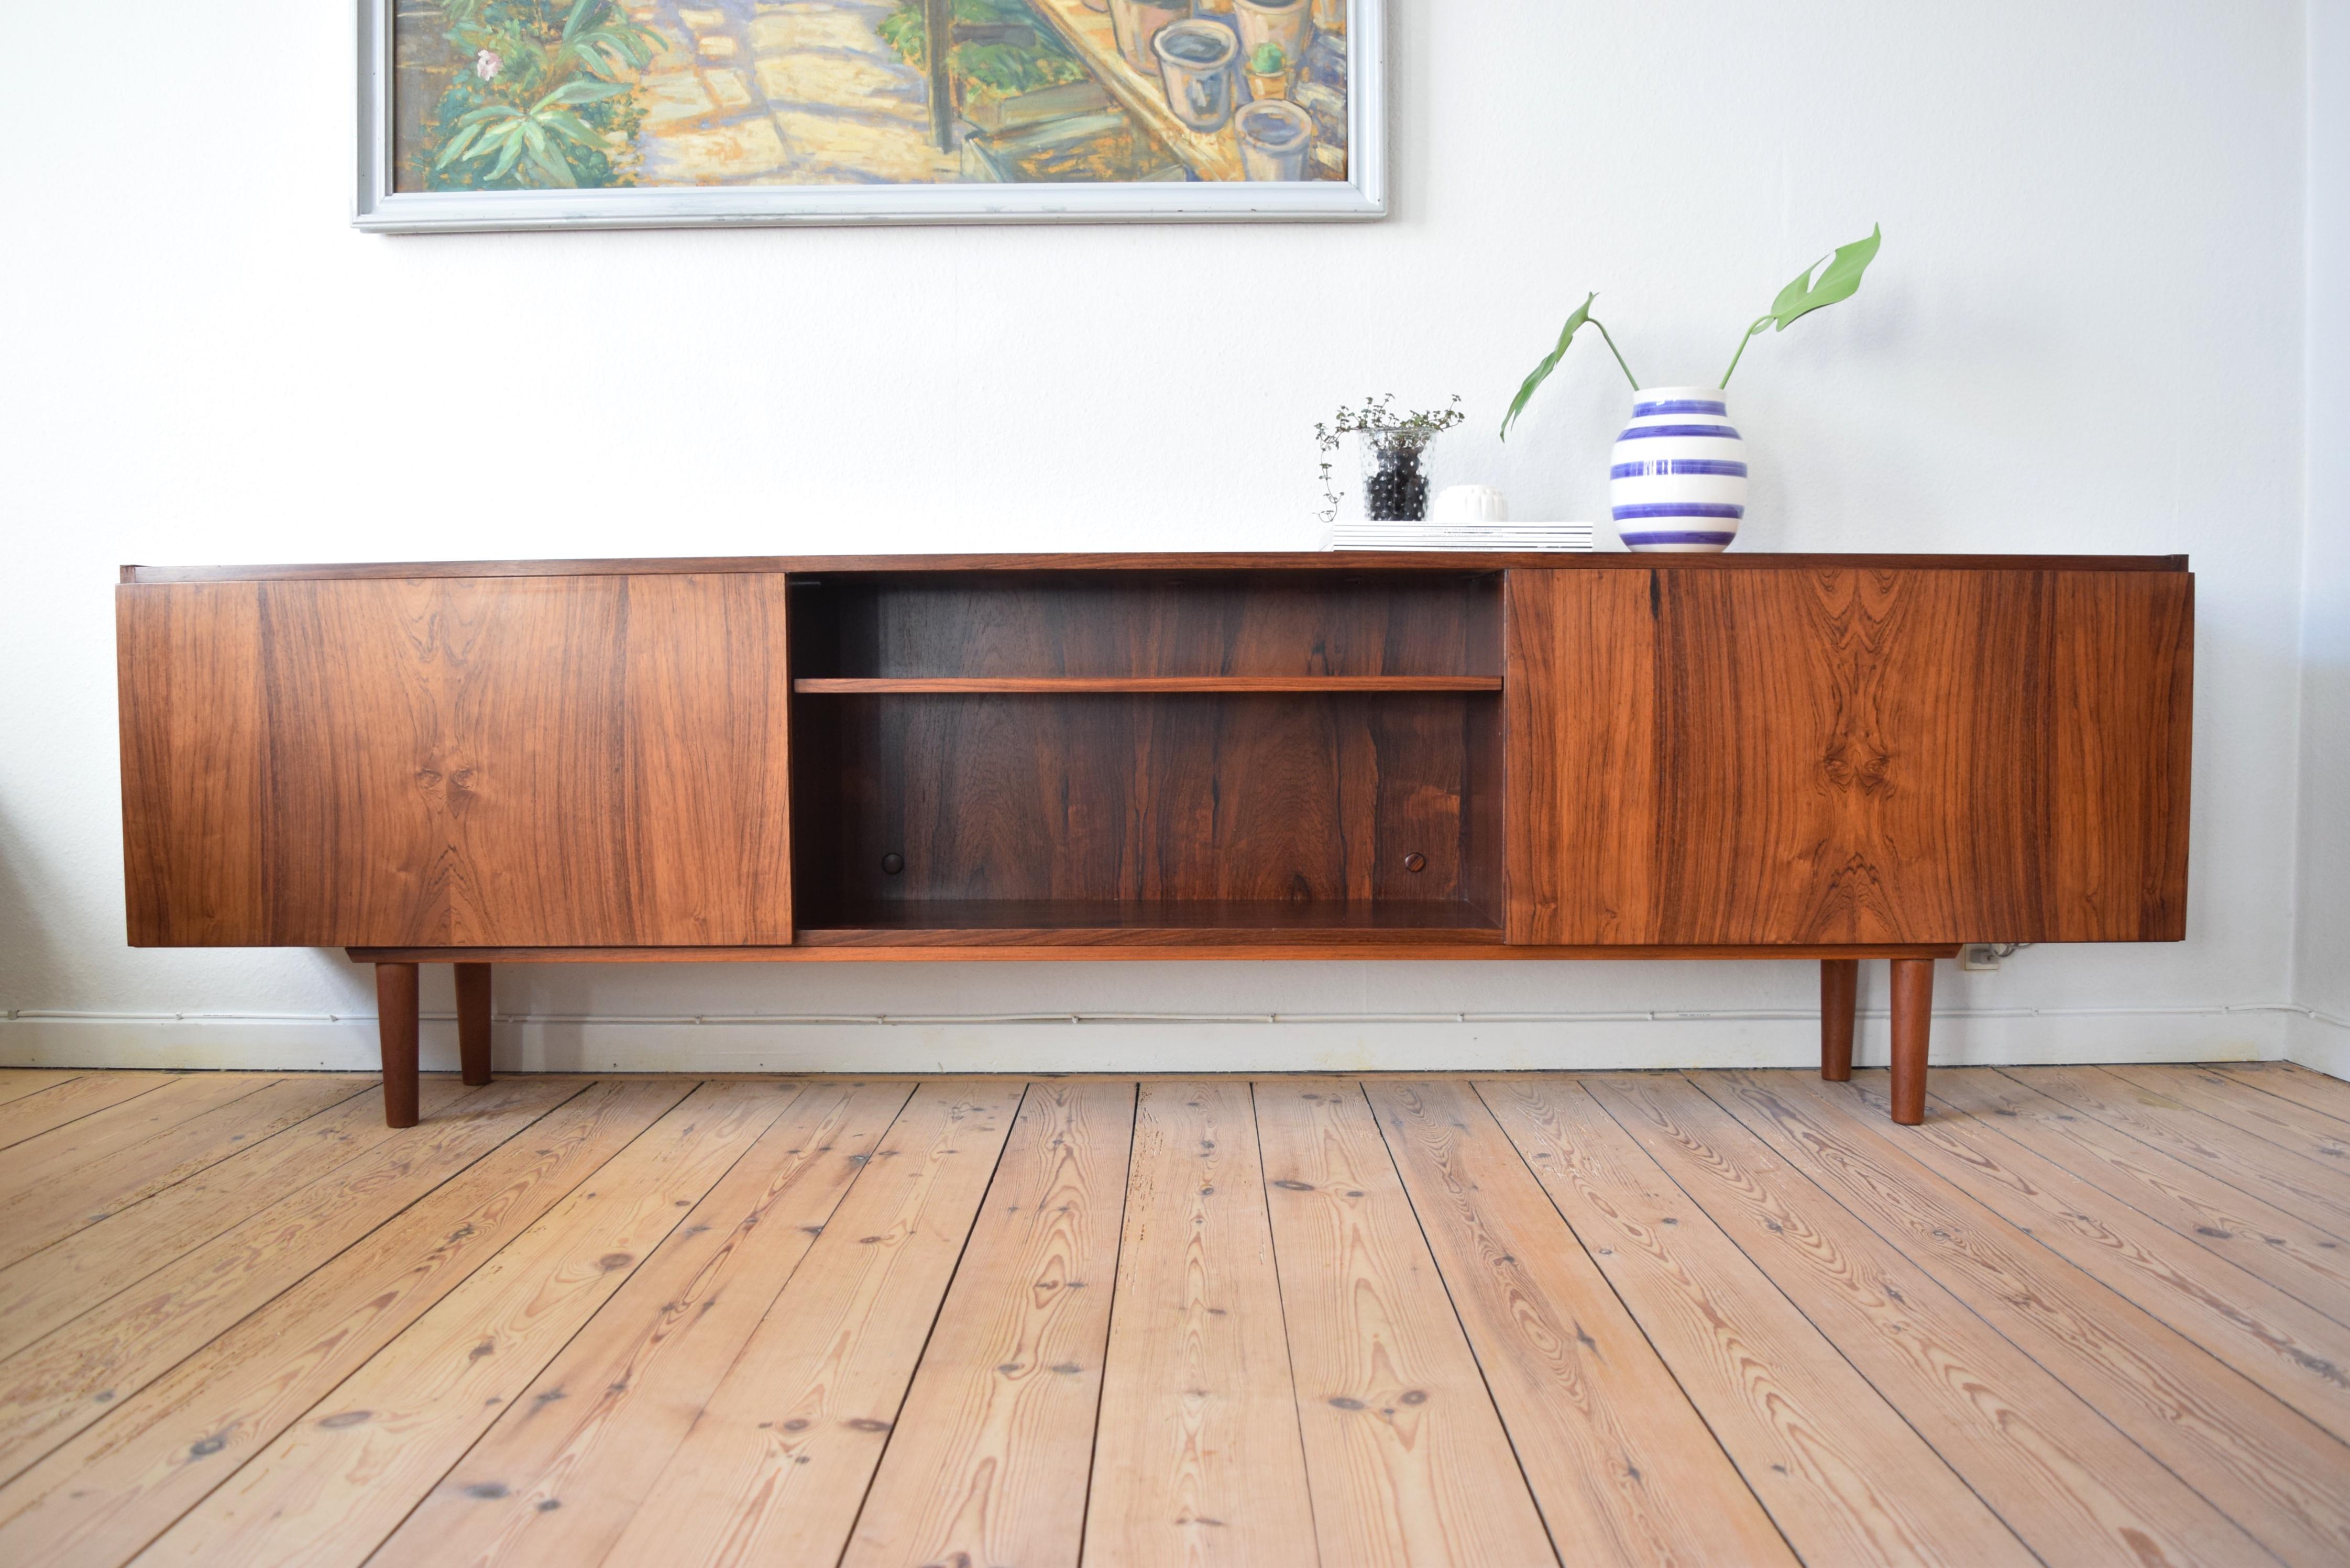 Very long and low rosewood sideboard by Ib Kofod-Larsen manufactured in Denmark in the late 1960s-early 1970s. Two storage spaces with flip-down doors on each side, one with a striking red vinyl interior which can be used as a bar cabinet. The other